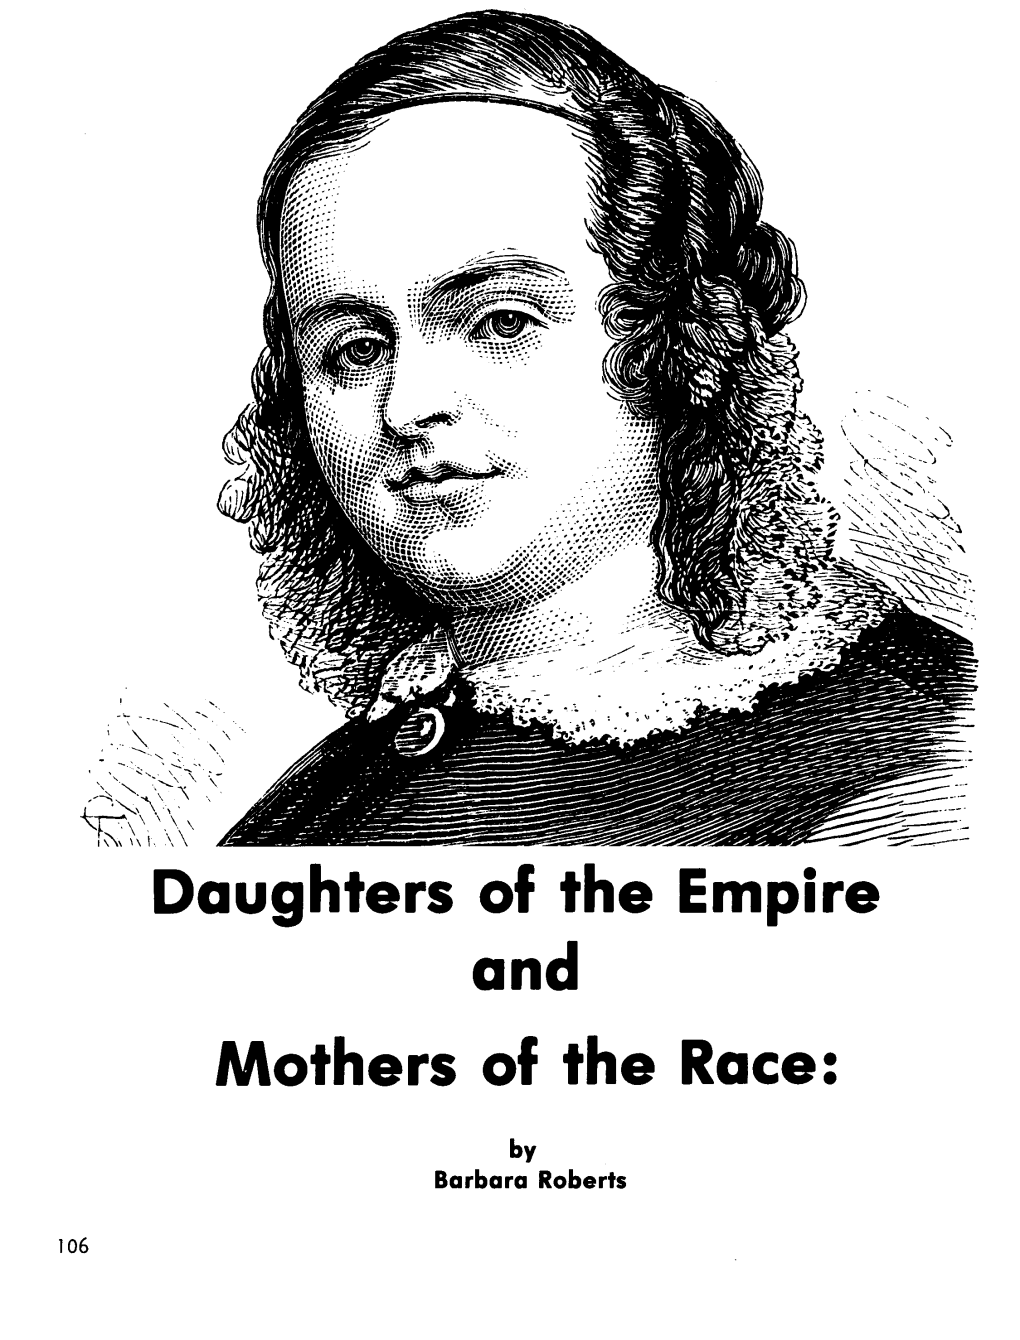 Daughters of the Empire and Mothers of the Race